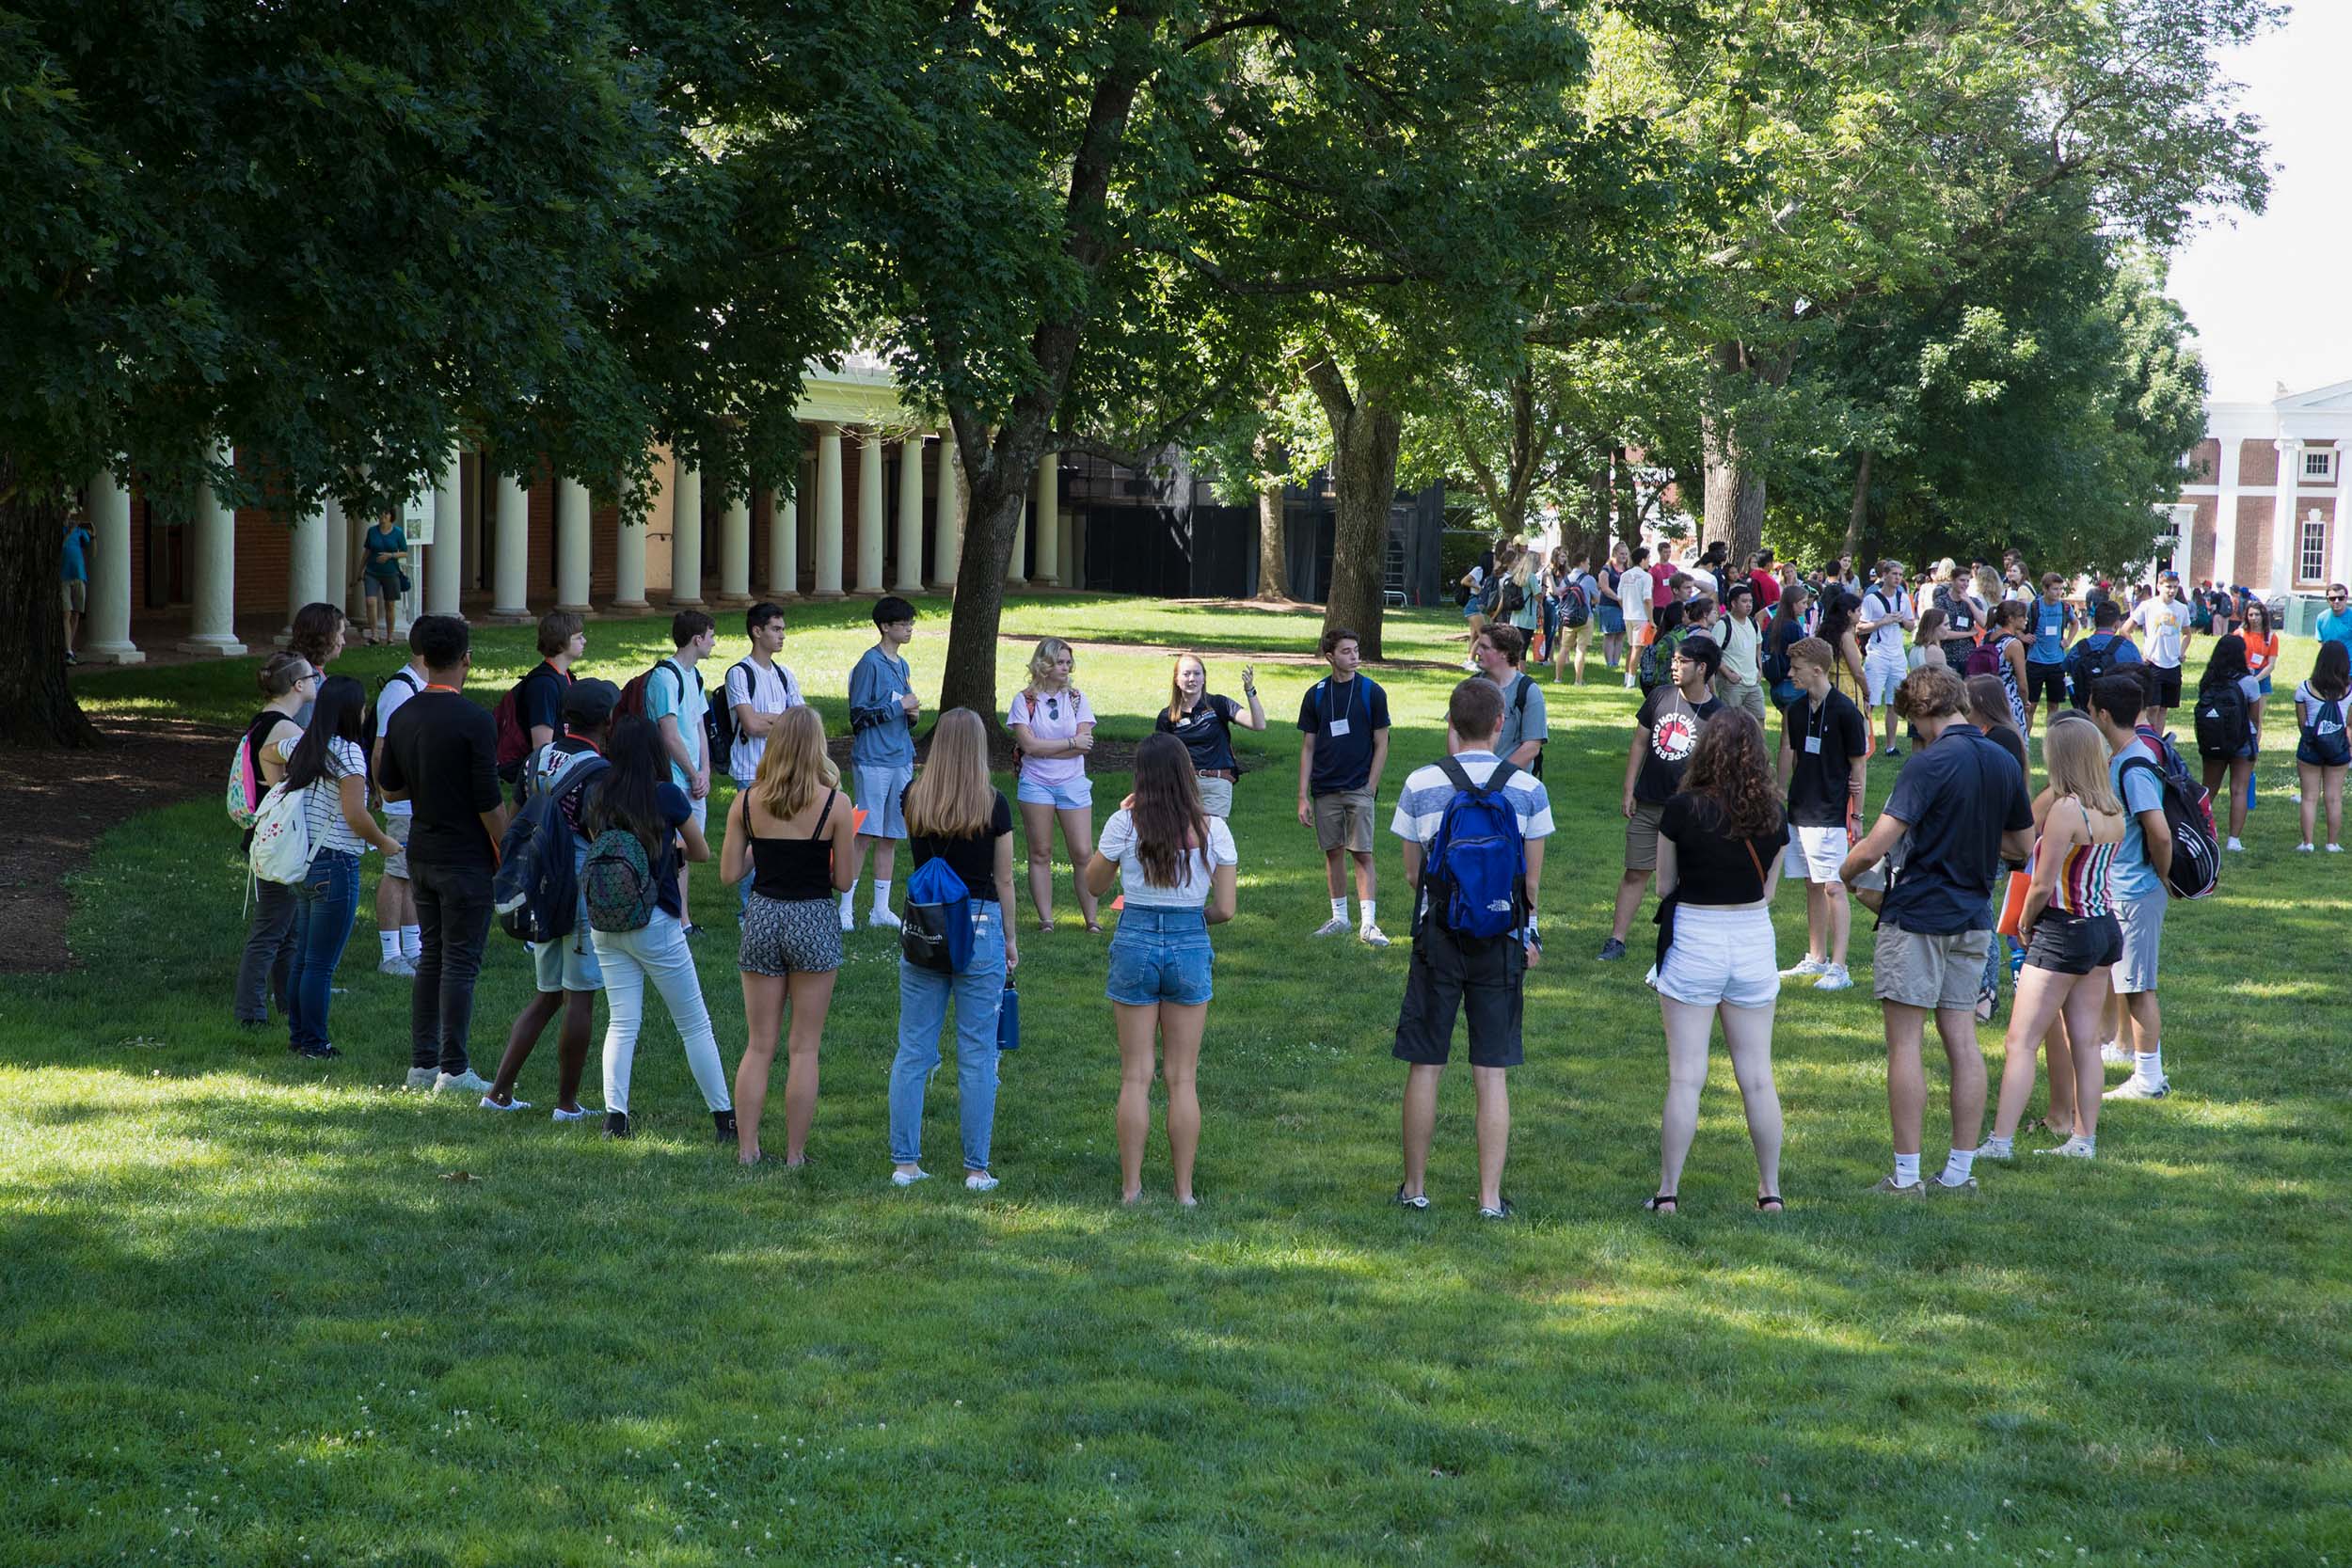 Orientation groups make circles on the lawn